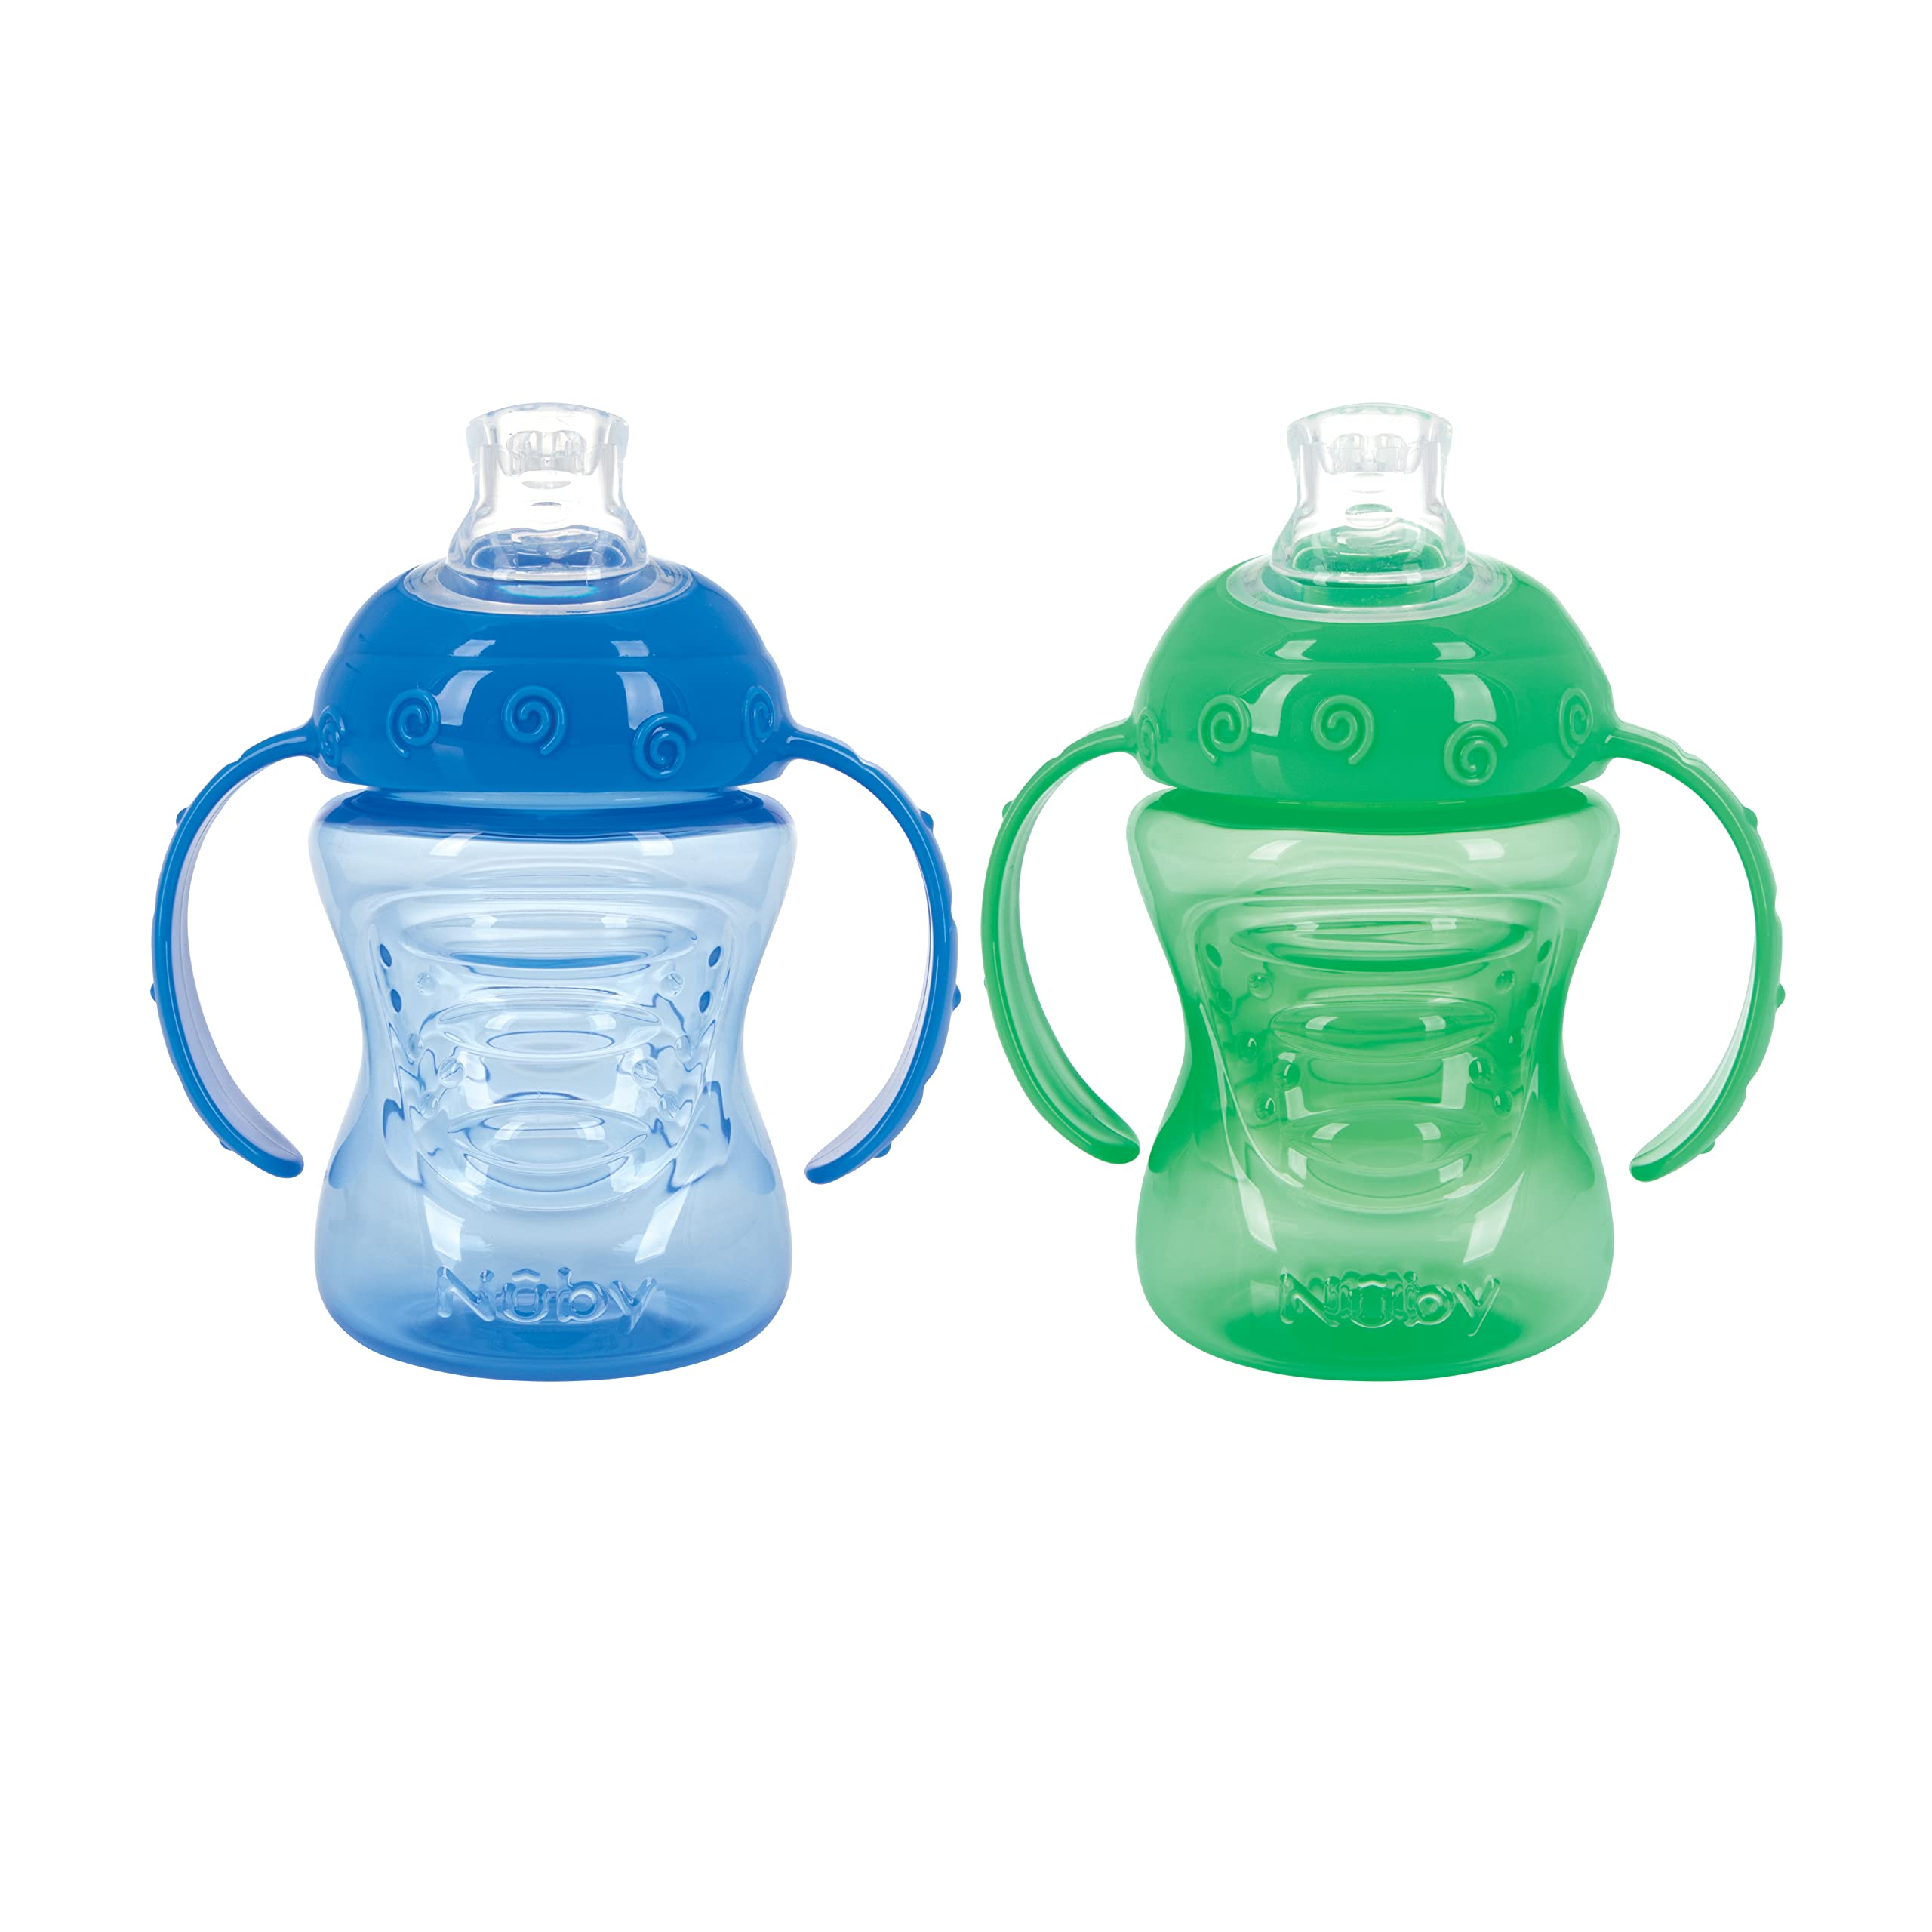 Nuby Two-Handle Flip N' Sip Straw Cup, 8 Ounce, Colors May Vary